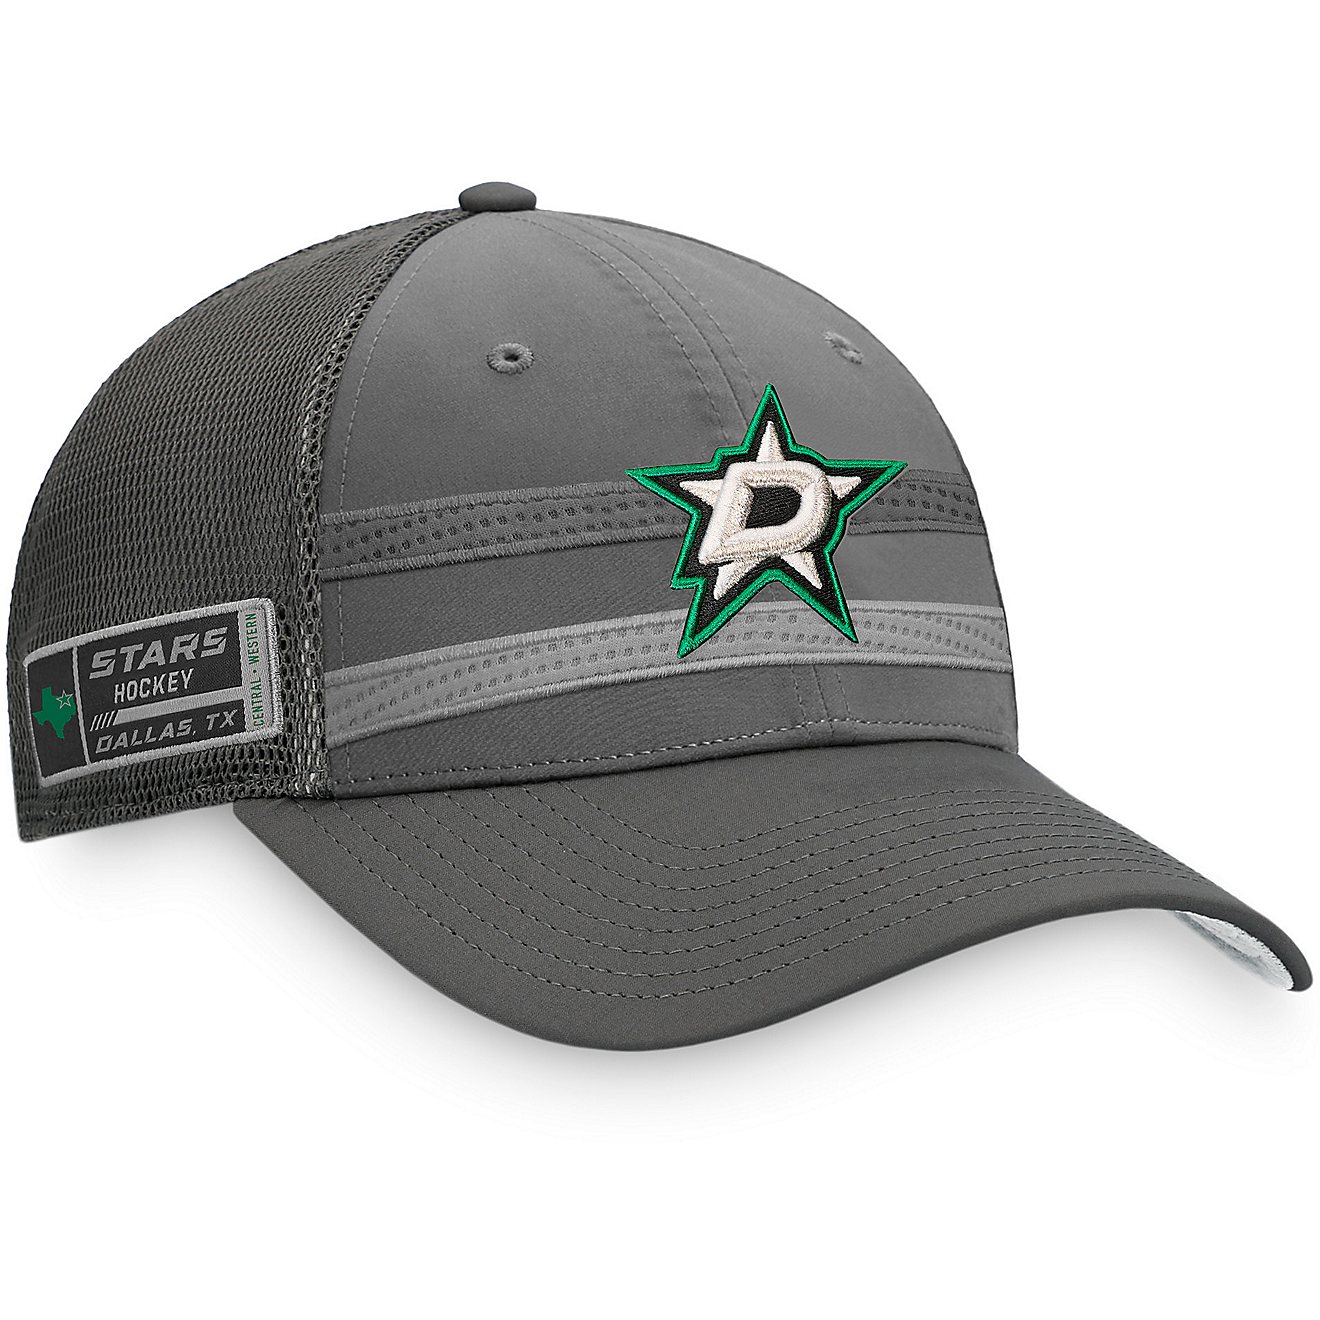 Fanatics Men's Dallas Stars Hockey Fights Cancer Structured Adjustable Cap                                                       - view number 1